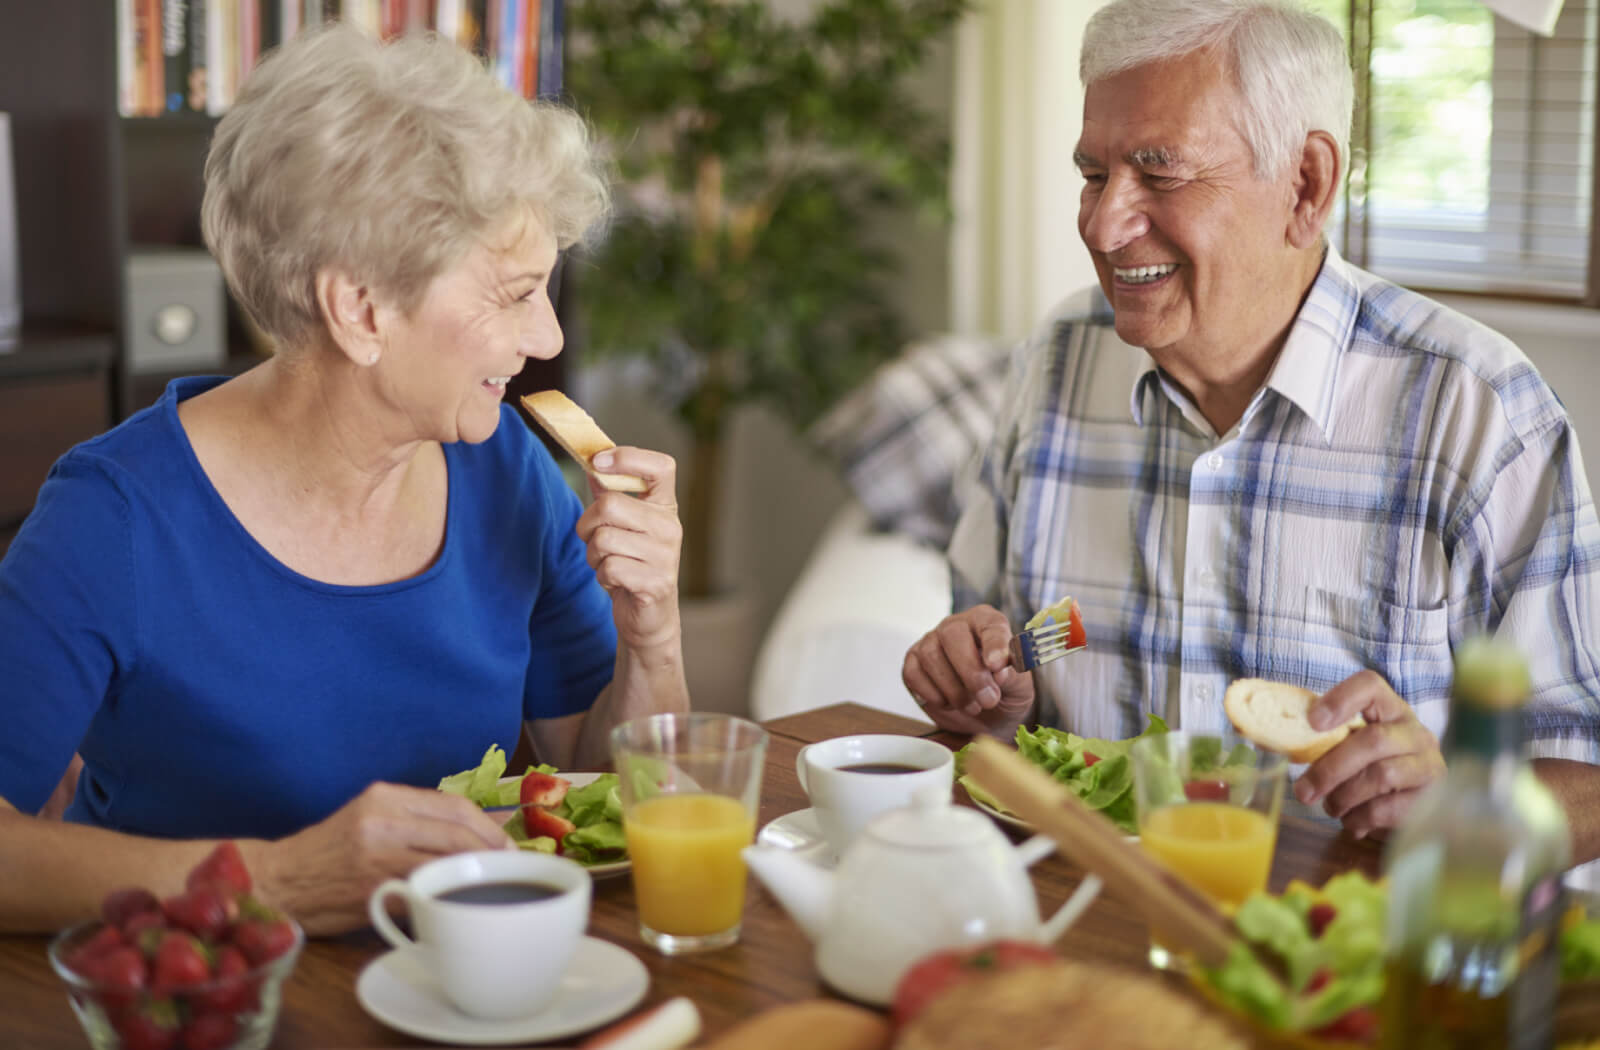 An older adult couple enjoying a healthy meal together.